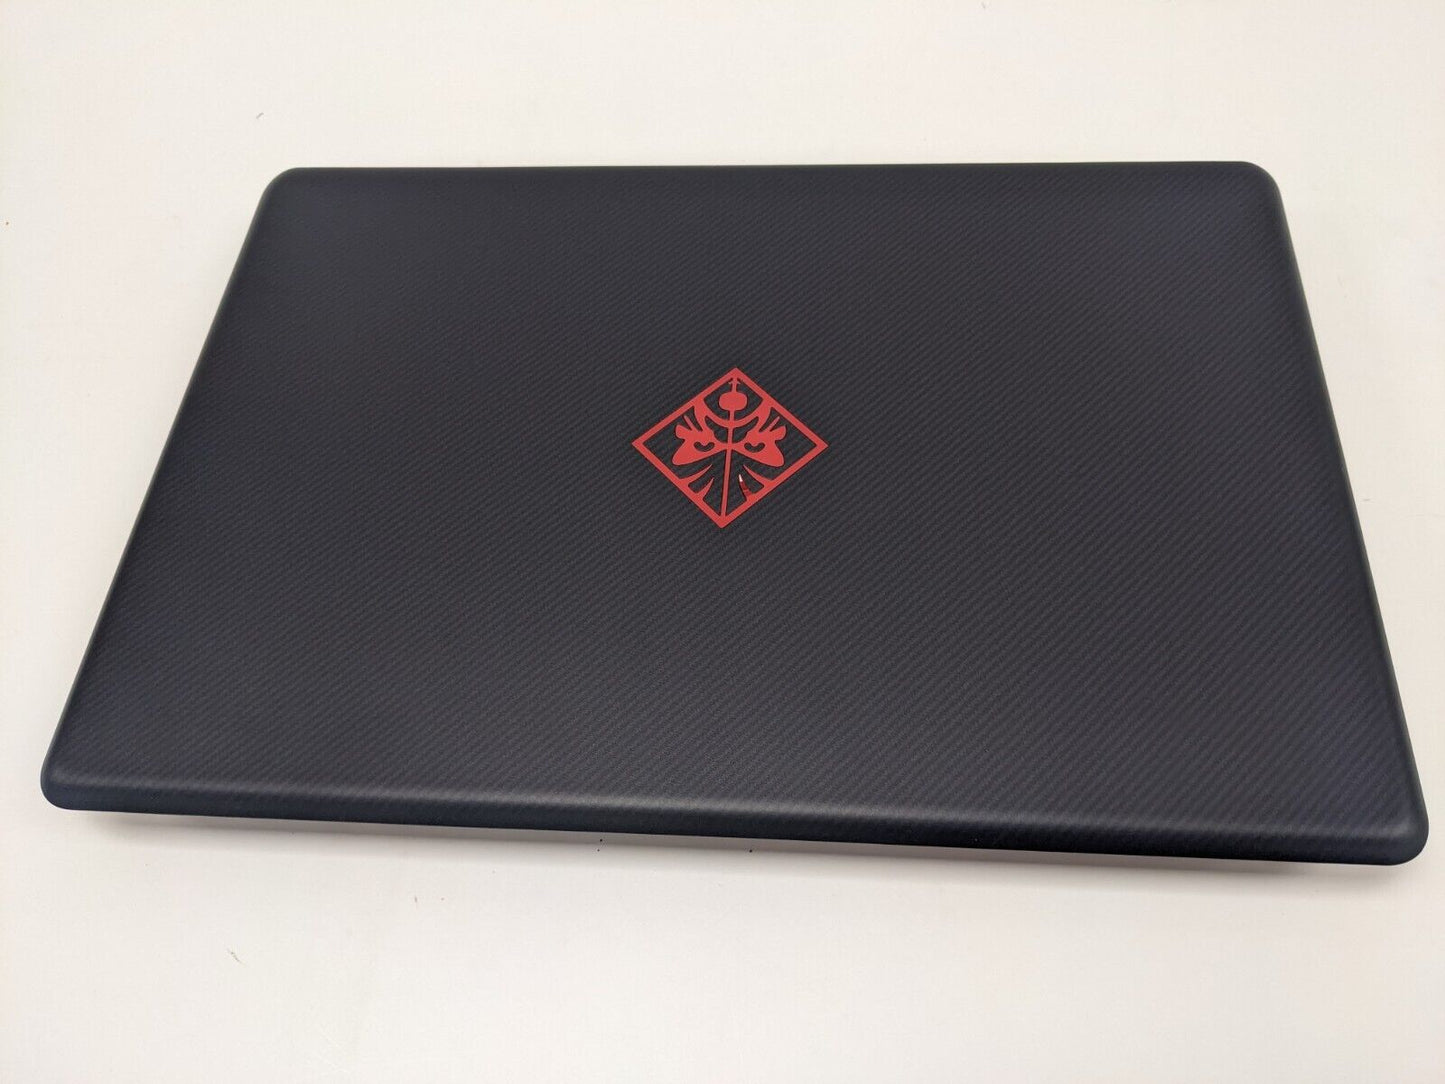 HP OMEN 17.3" i7 7th 12GB 1TB HDD Gaming Laptop - 1QL52UA#ABA Reconditioned